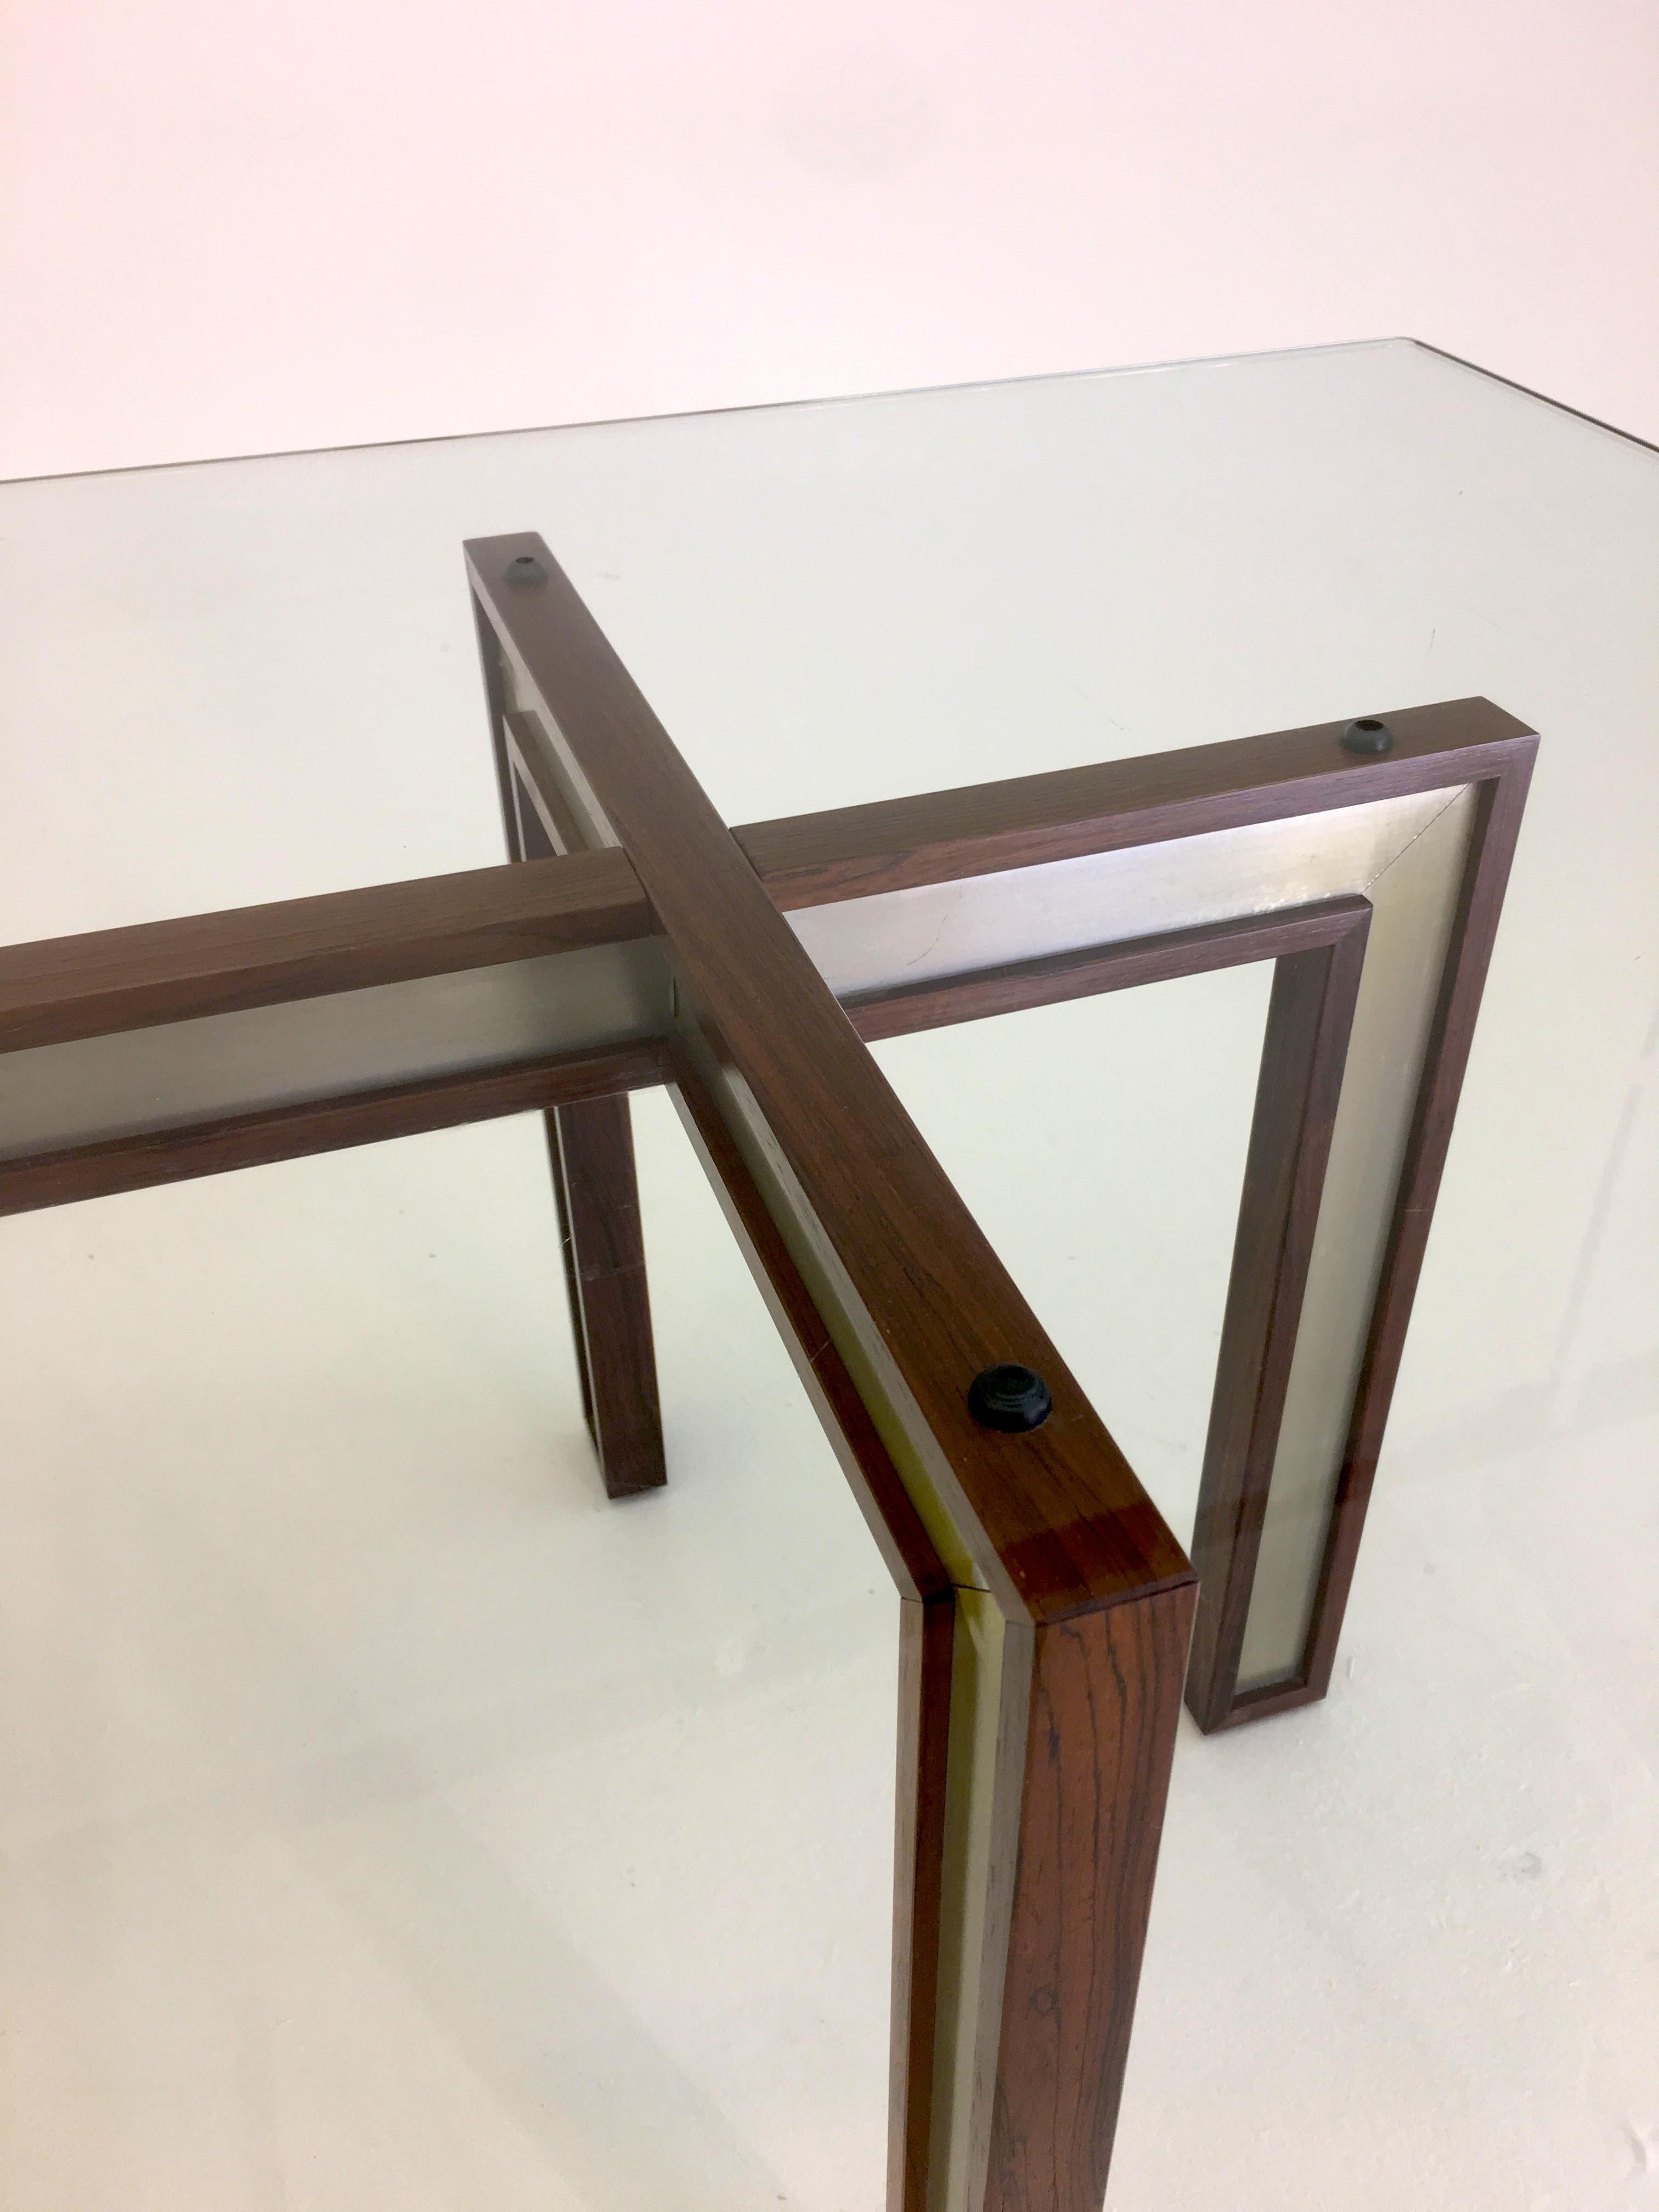 Mid-20th Century Danish Glass Coffee Table by Henning Korch with Rosewood and Aluminum Frame